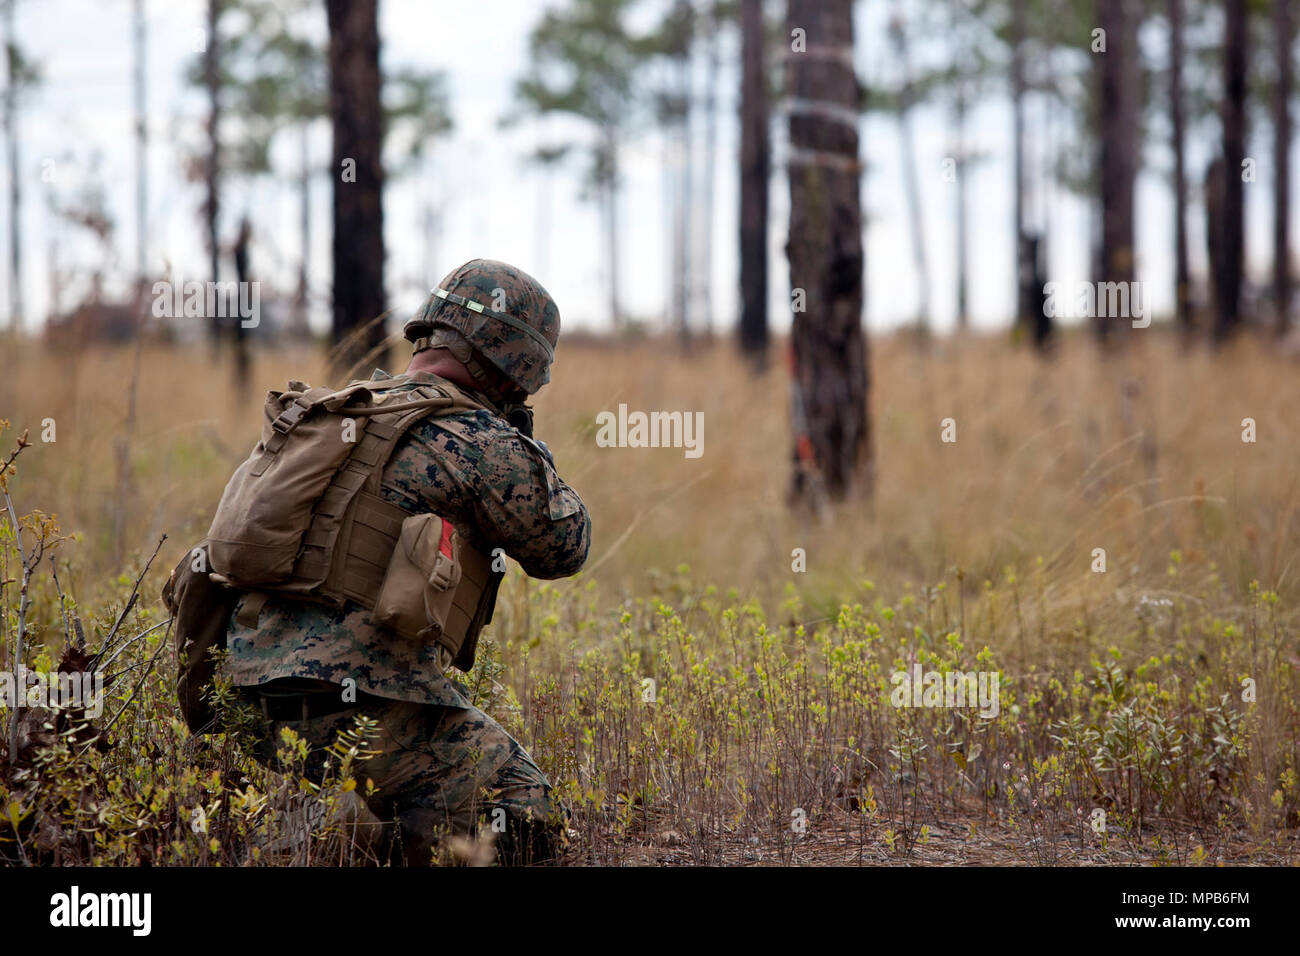 A U.S. Marine attached to Advanced Infantry Training Battalion, School of Infantry-East (SOI-E), fires an M4A1 carbine during a combined arms exercise at Camp Lejeune, N.C., April 7, 2017. The mission of SOI-E is to train entry-level and advanced level Marines in the skills required of an Infantry Marine for the operating forces. Stock Photo